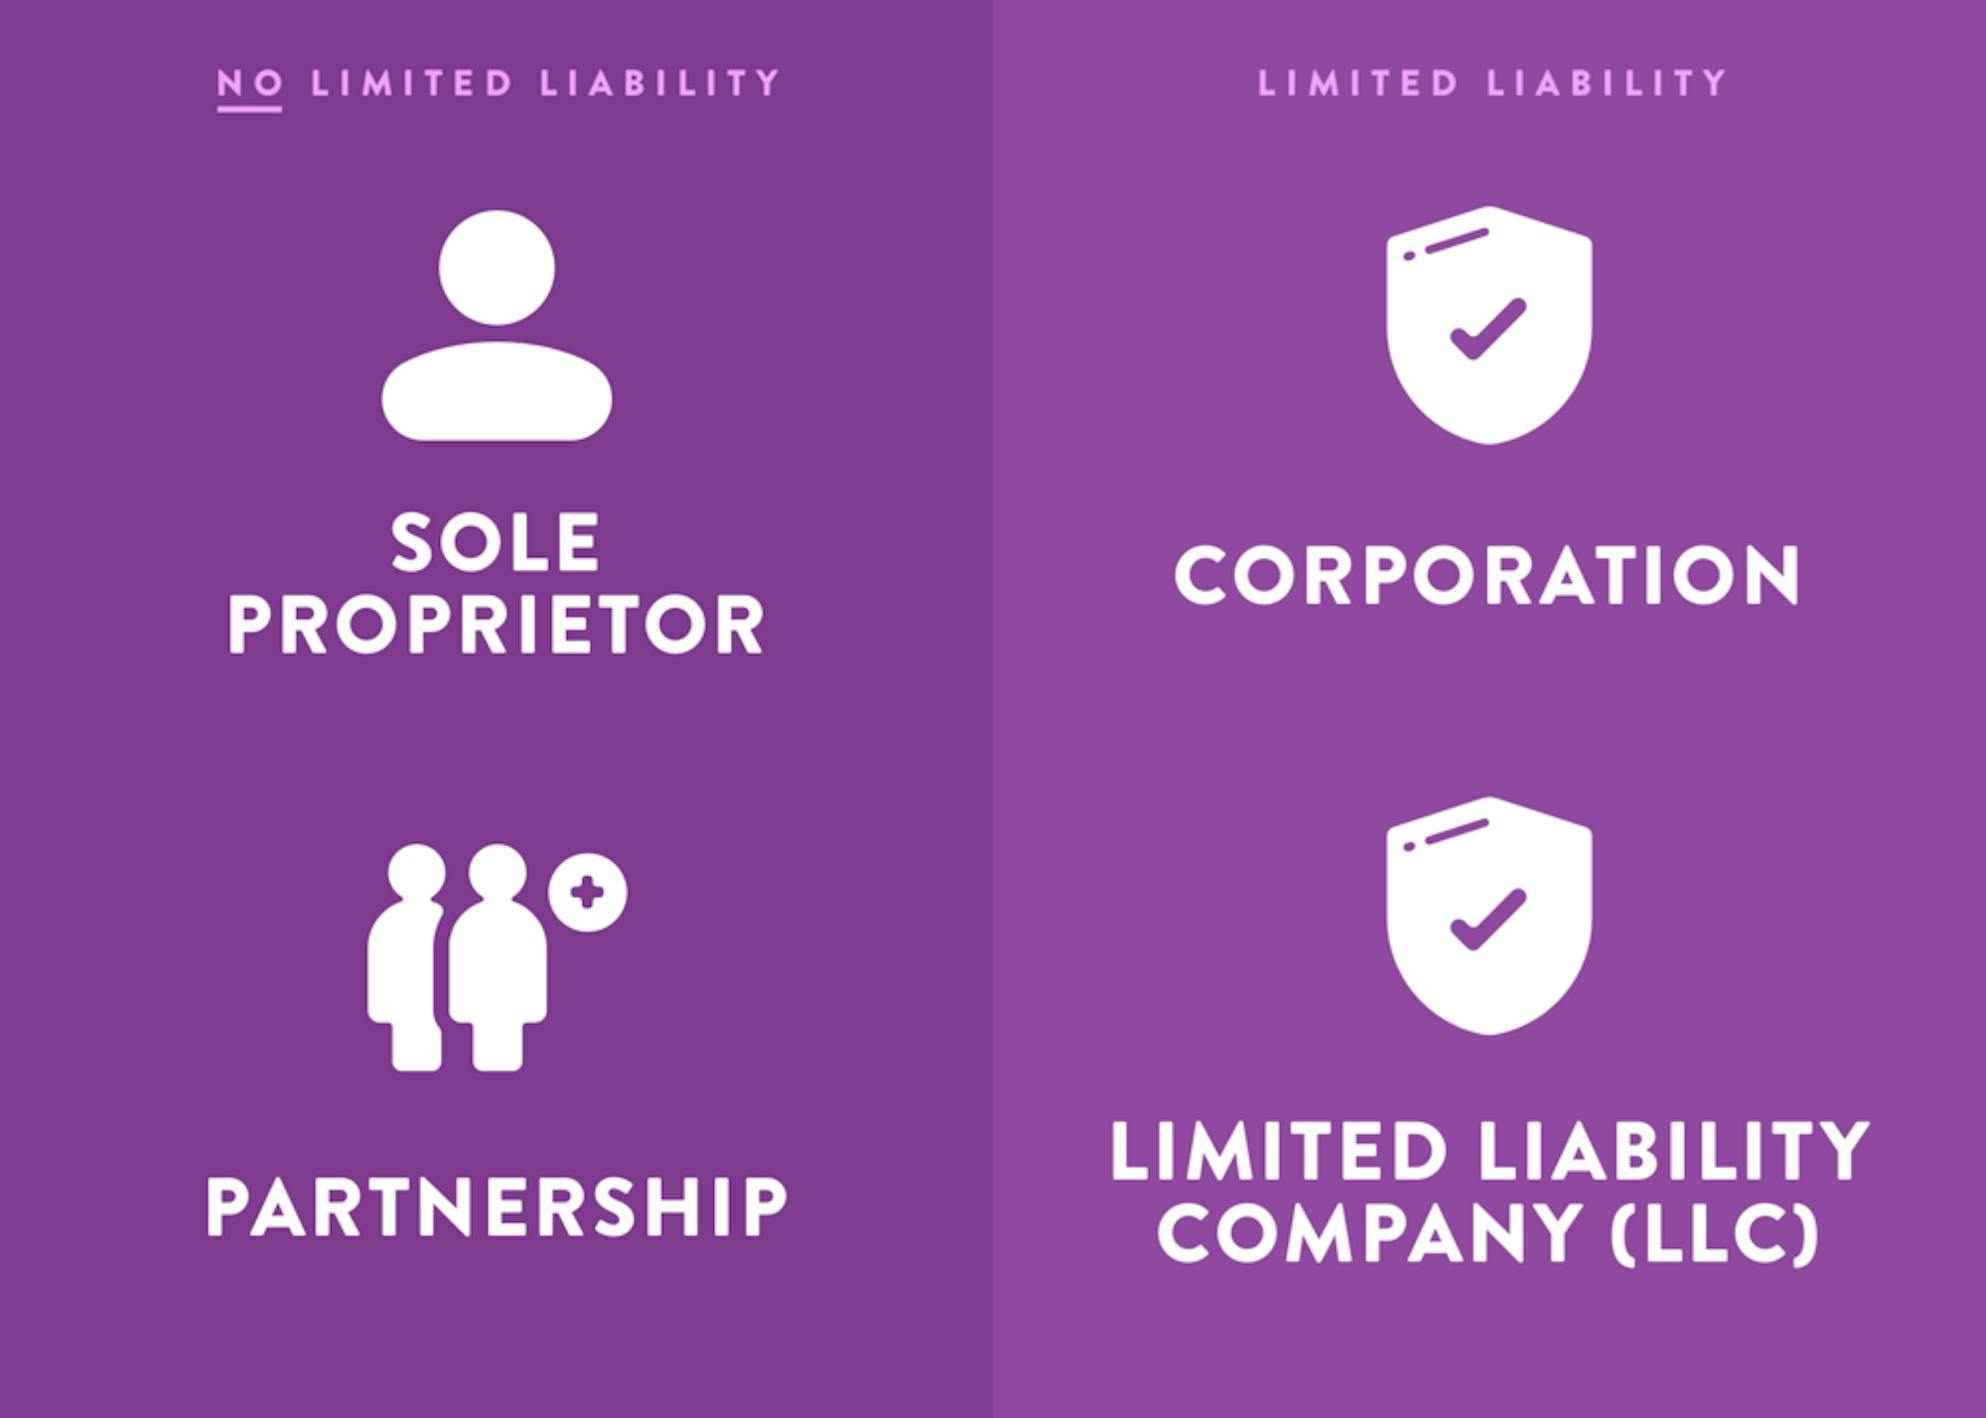 LLCs and Corporations have limited liability. Sole Proprietors and Partnerships do not.